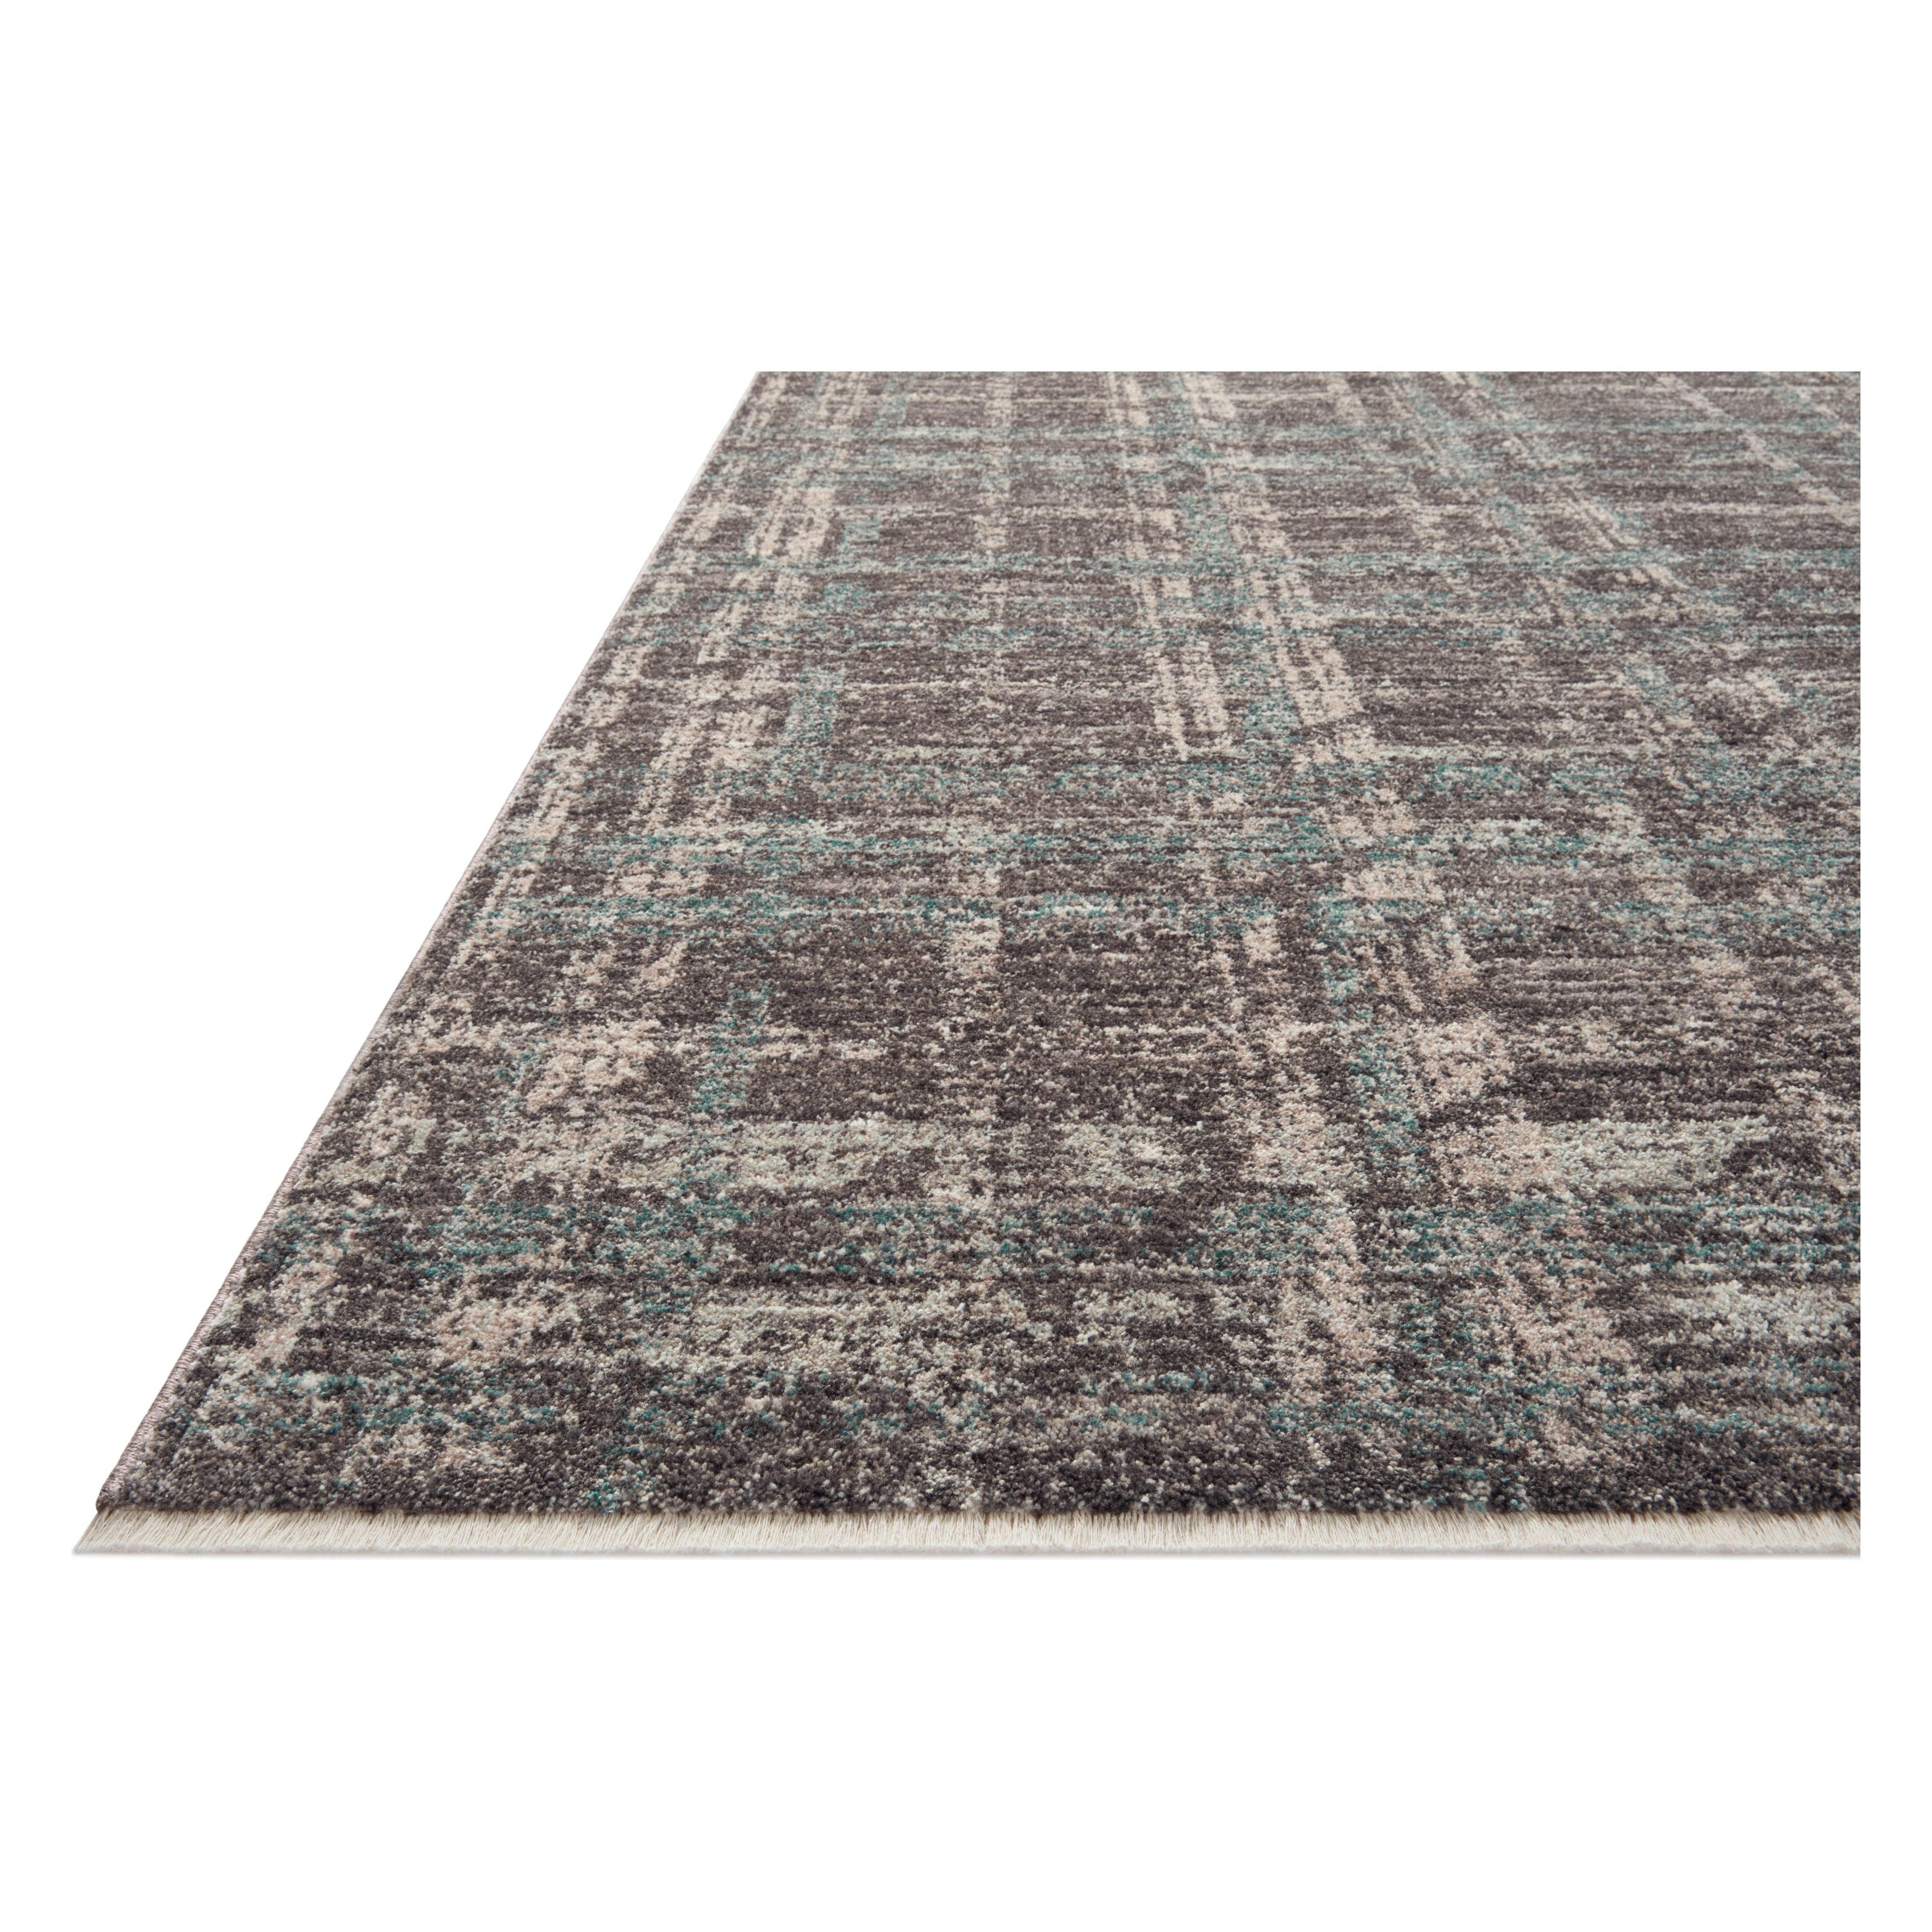 The Ember Collection by Angela Rose x Loloi is a modern flatweave area rug with a timeless plaid pattern that adds depth and coziness to any living room, bedroom, dining room, or hallway. Ember is power-loomed of 100% space-dyed polyester, a durable construction that creates a nuanced depth of color, available in a range of neutral palettes. Amethyst Home provides interior design, new home construction design consulting, vintage area rugs, and lighting in the Kansas City metro area.